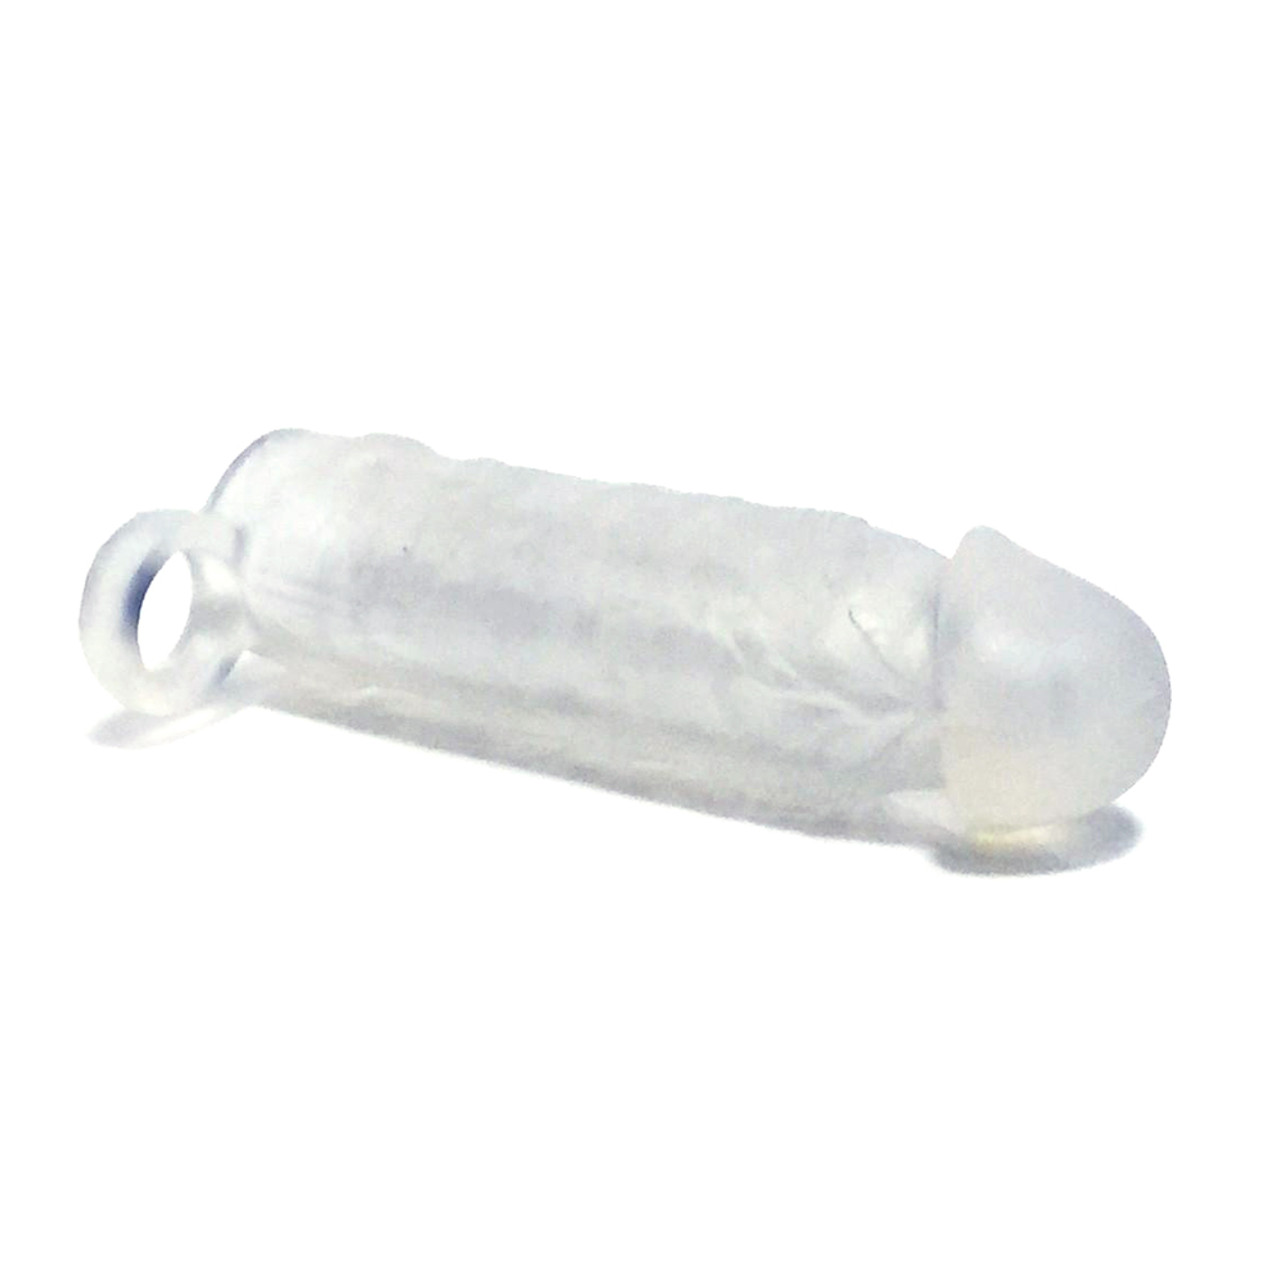 buy The Meaty 3X Stretch Realistic Silicone Penis Extender and Girth Enhancing Sleeve with Ball Strap in Clear ManSizer